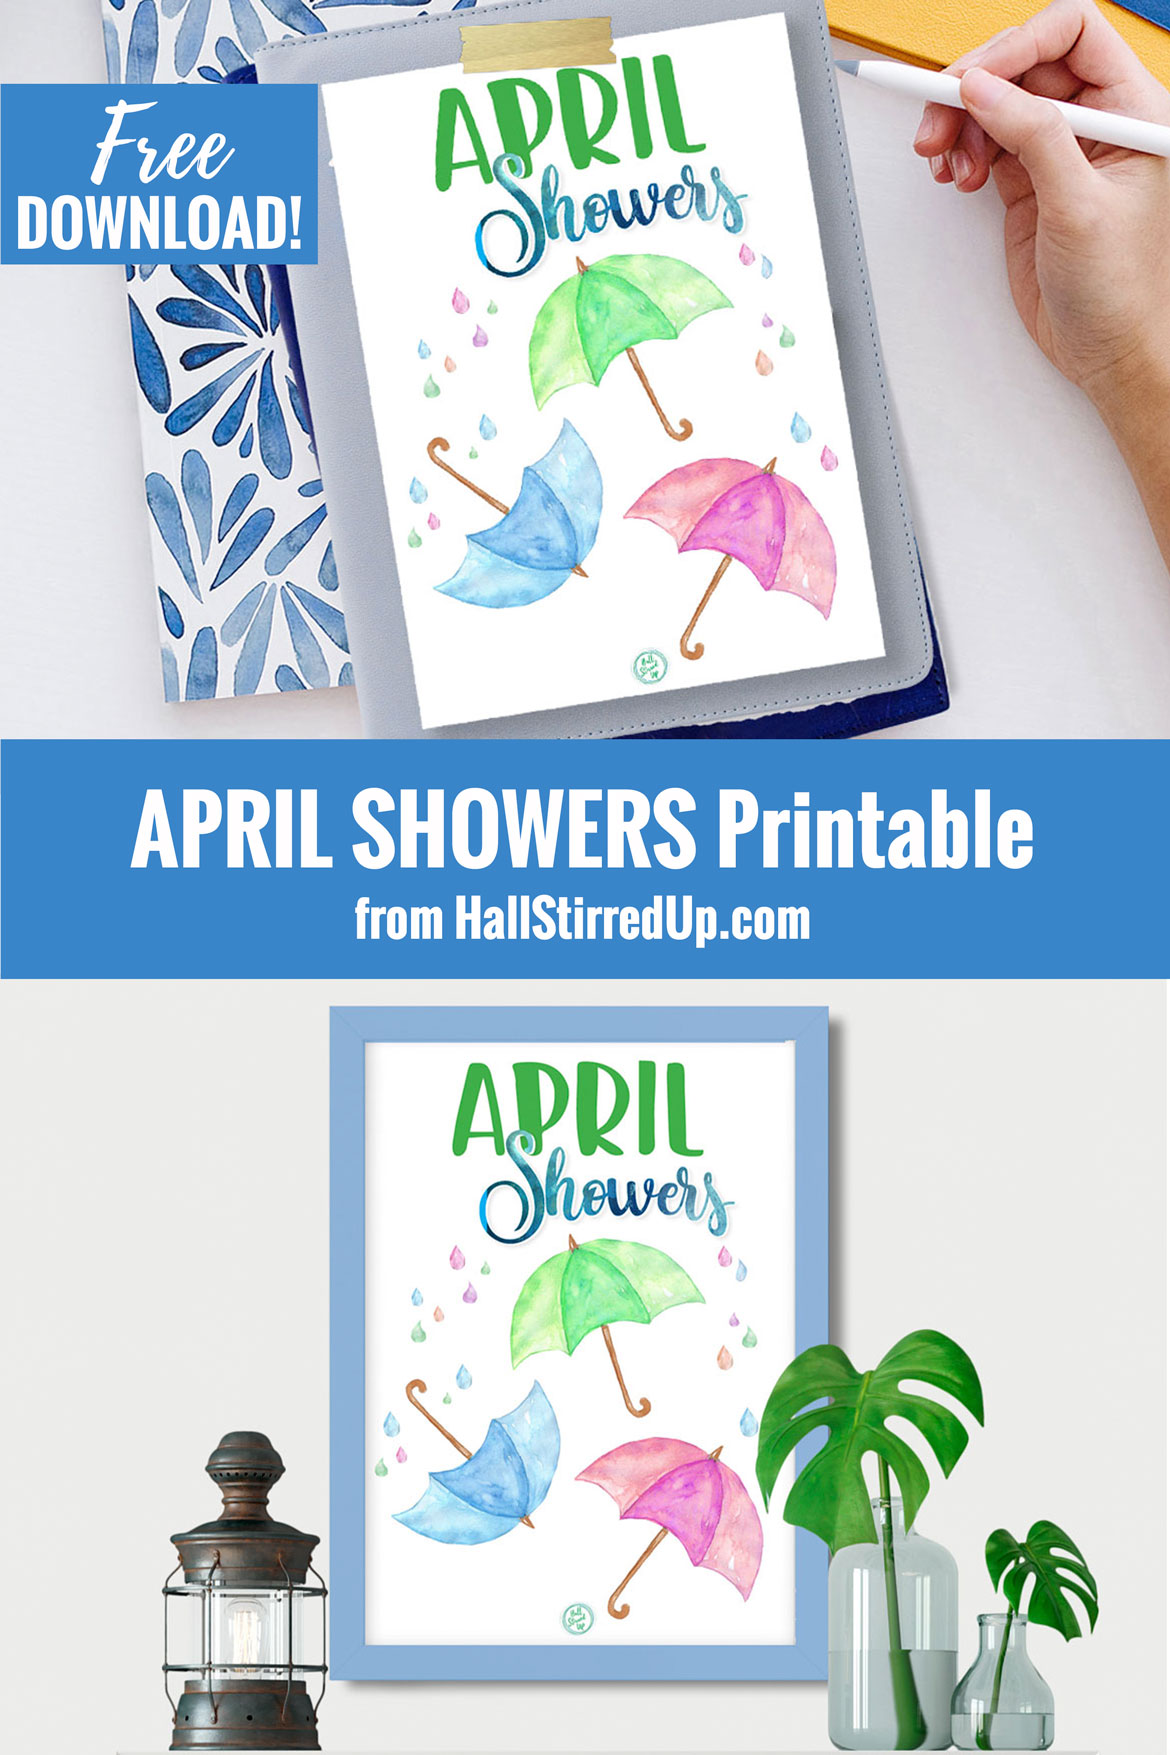 It's time for an April Showers printable